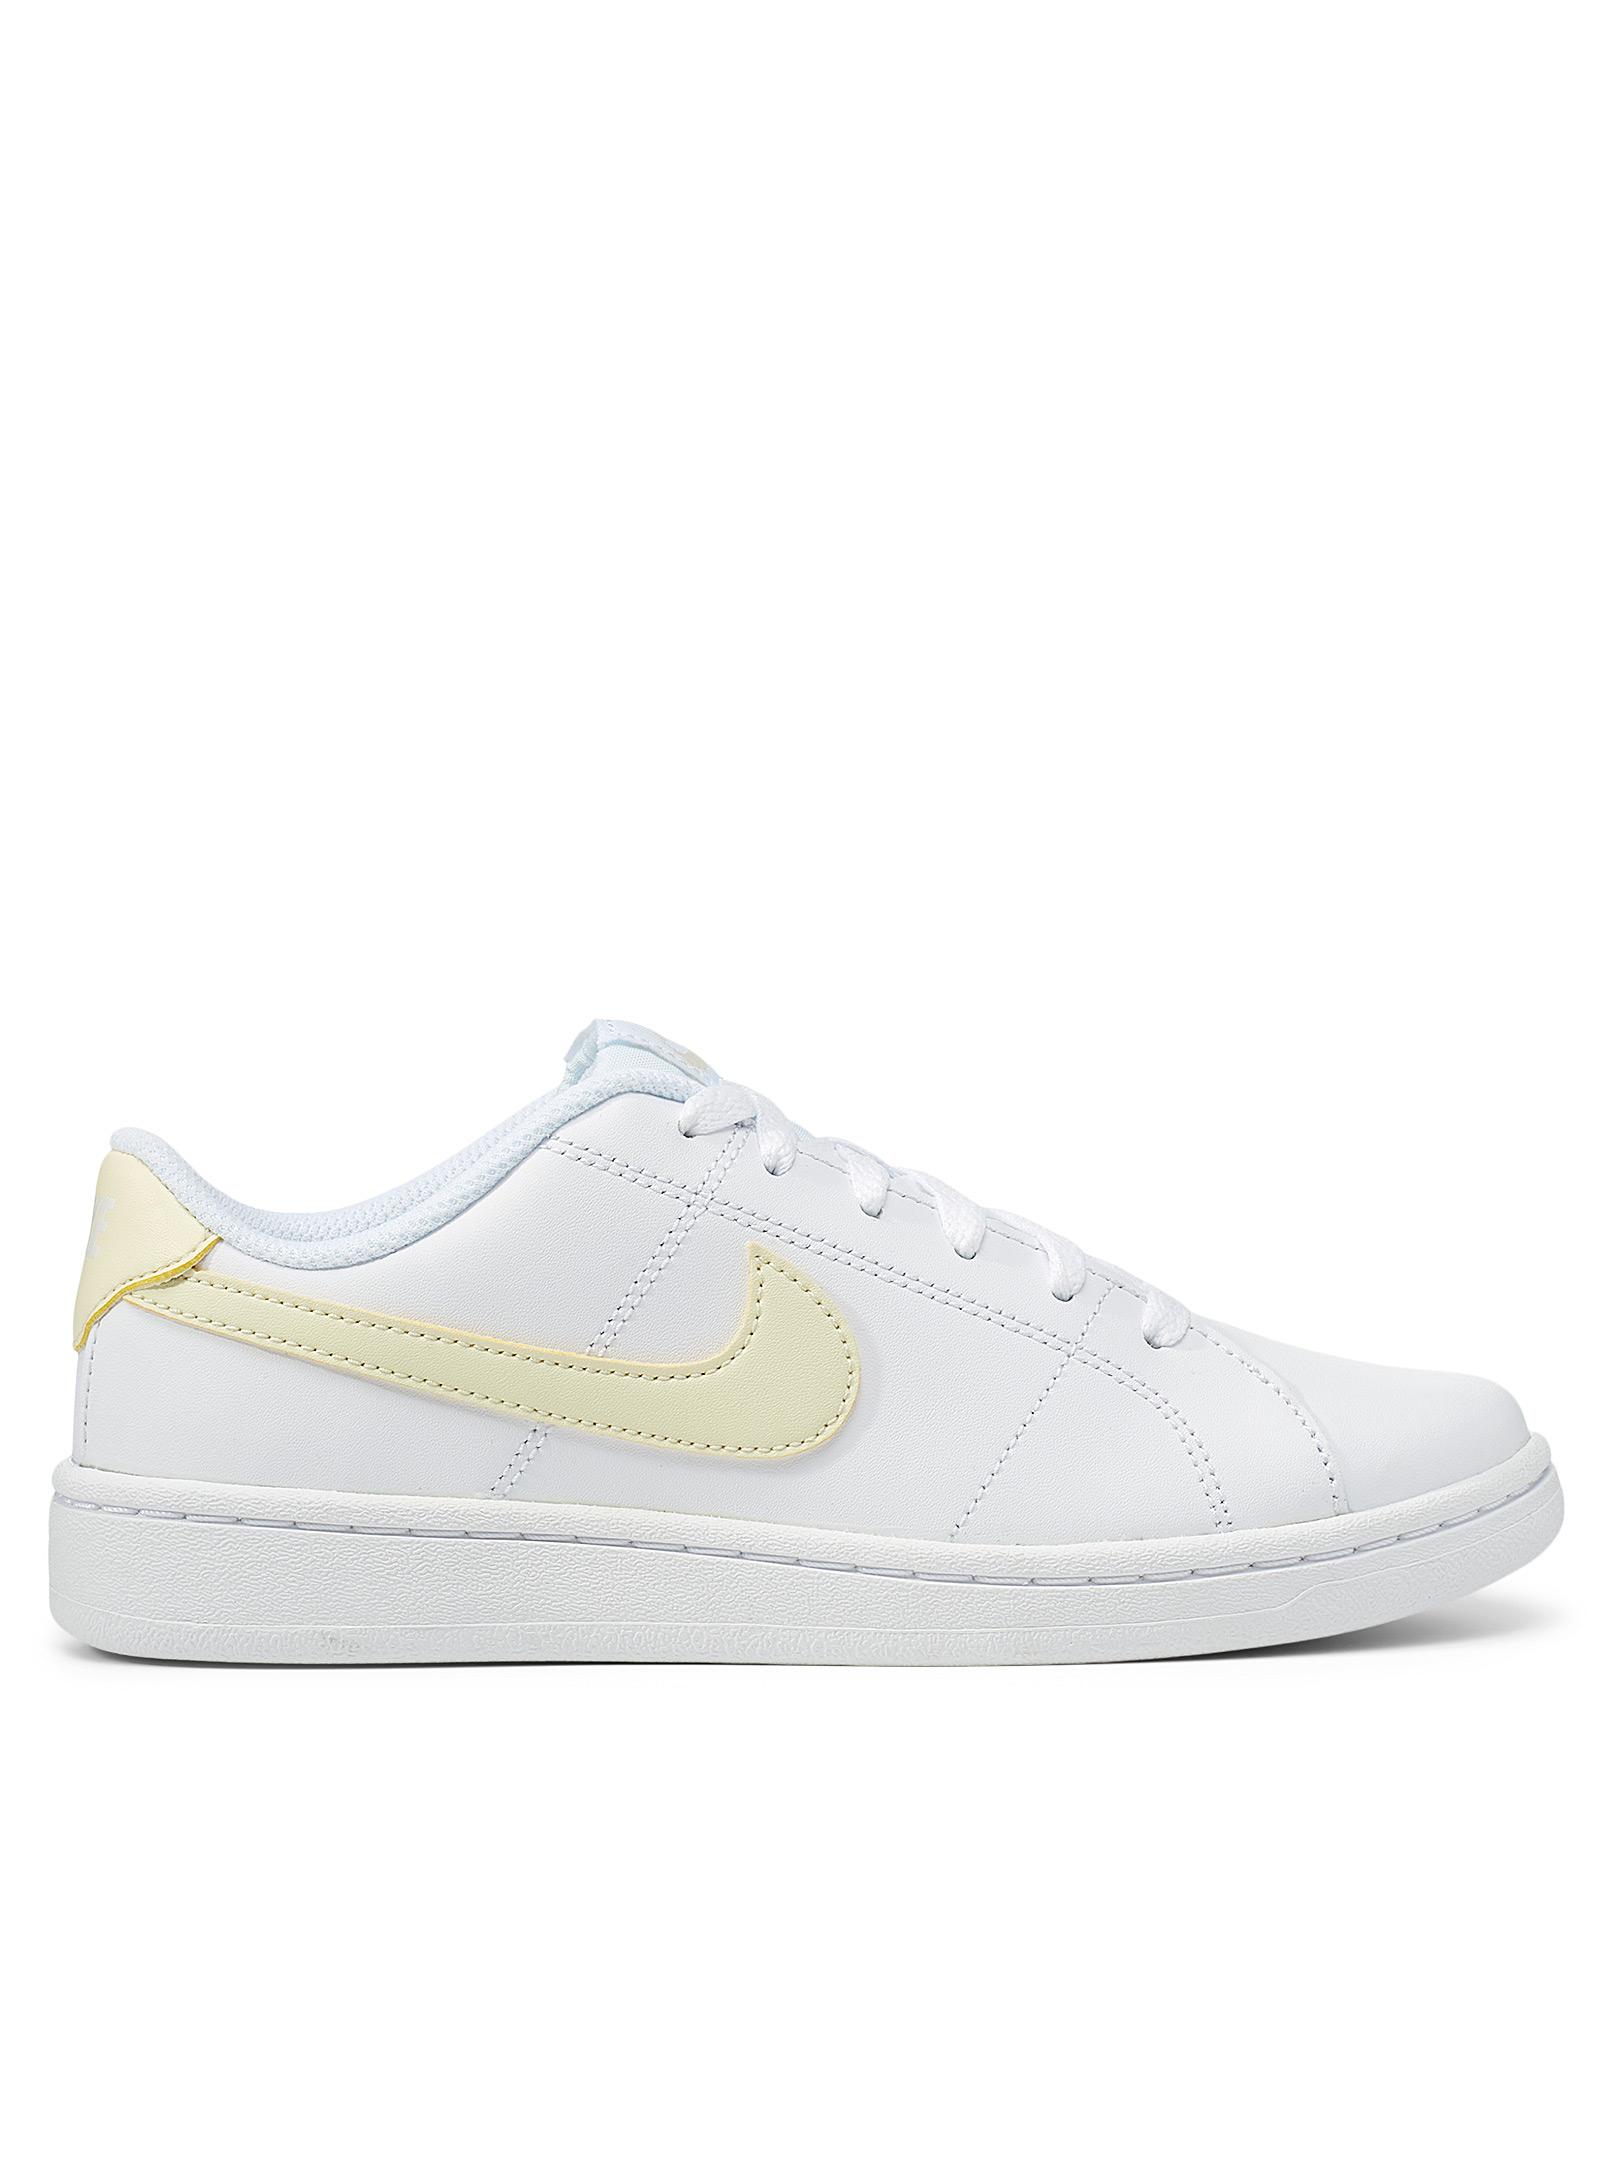 Nike Leather Court Royale 2 Yellow in White - Lyst